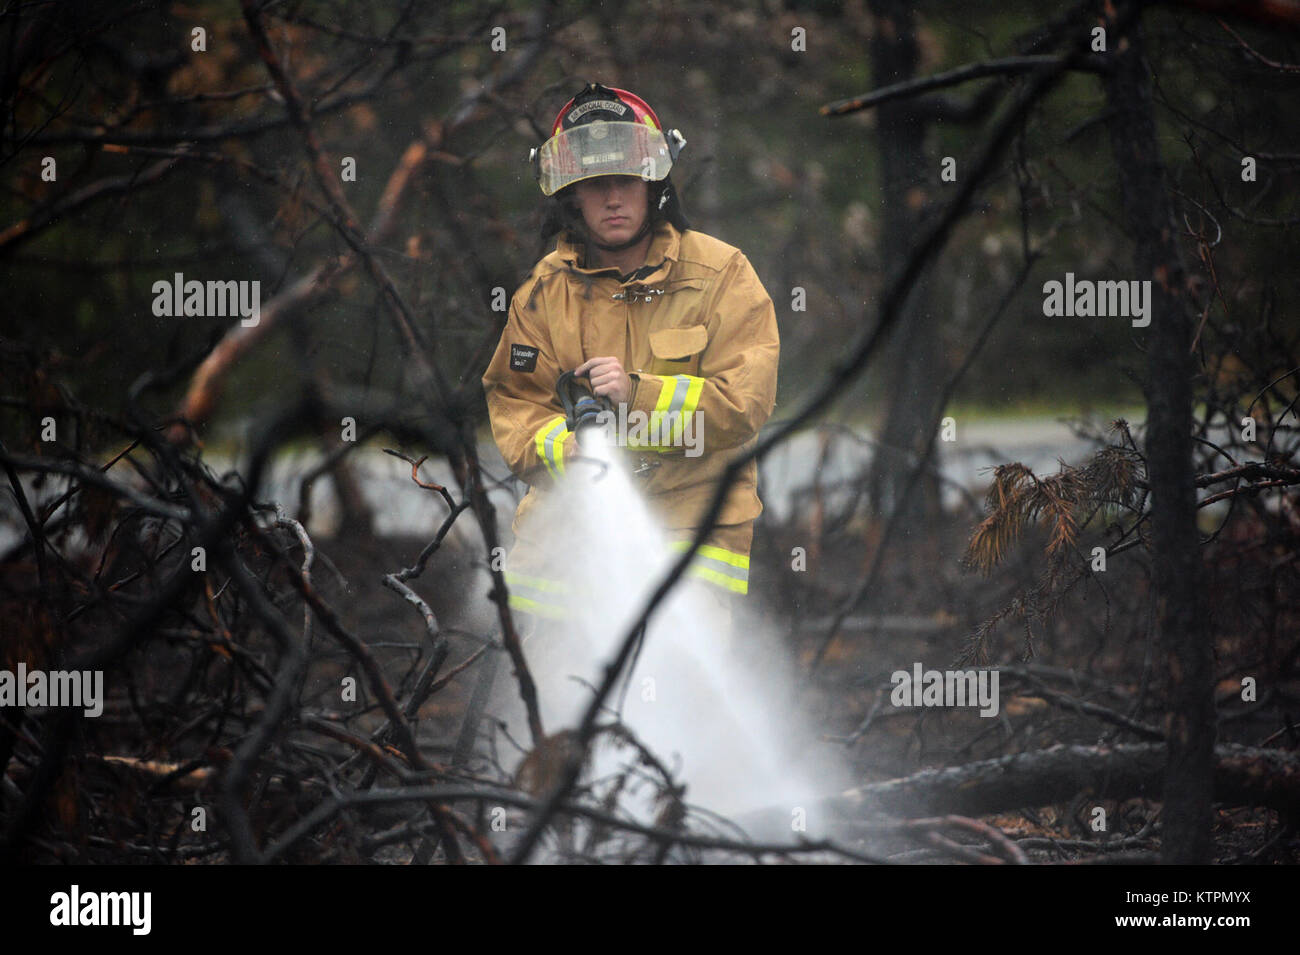 WESTHAMPTON BEACH, NY - Senior Airman Brandon L. Ehlers, a firefighter with the 106th Rescue Wing, sprays down a burned area of woods with water on August 21st, 2015.  Multiple agencies and fire departments responded to a major brushfire in this area. Firefighters from the 106th visited to check for hotspots, a serious concern given the otherwise dry weather over the last week. The four acre fire destroyed a large swath of land outside FS Gabreski ANG just off Old Riverhead Road, requiring a multi-agency response, including eight brush trucks, seven tankers and fourteen different departments w Stock Photo